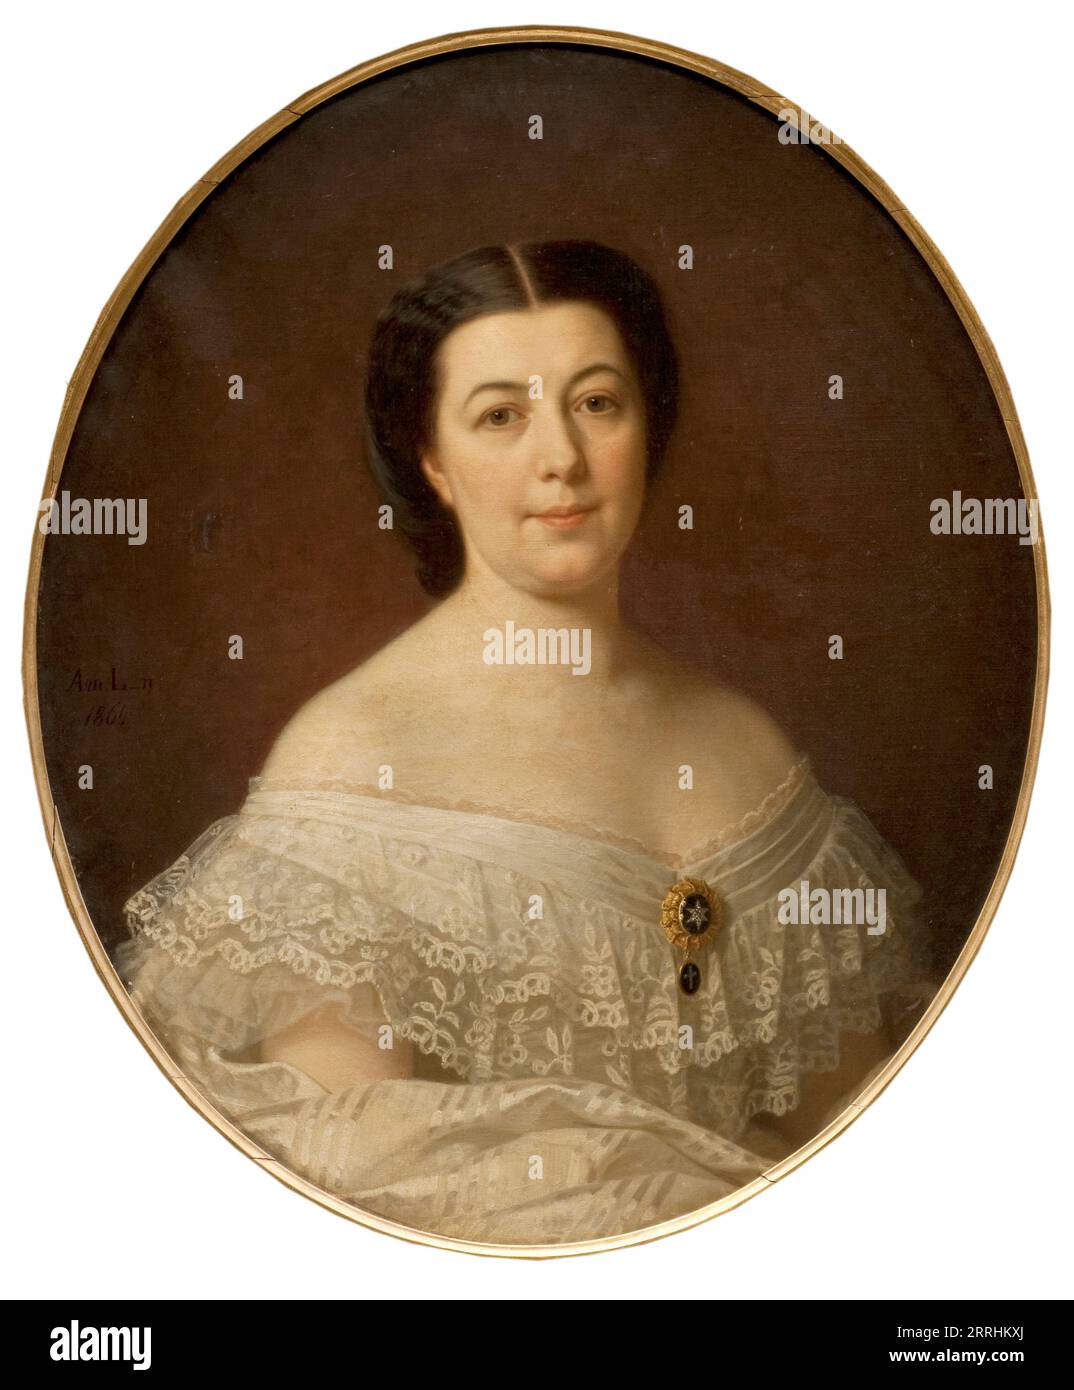 Oscara Fredrica Leopoldina Wahlstr&#xf6;m (1828-1895), married to the wholesaler, mill owner and banker Joseph Nathanael Micha&#xeb;li, c19th century. Stock Photo